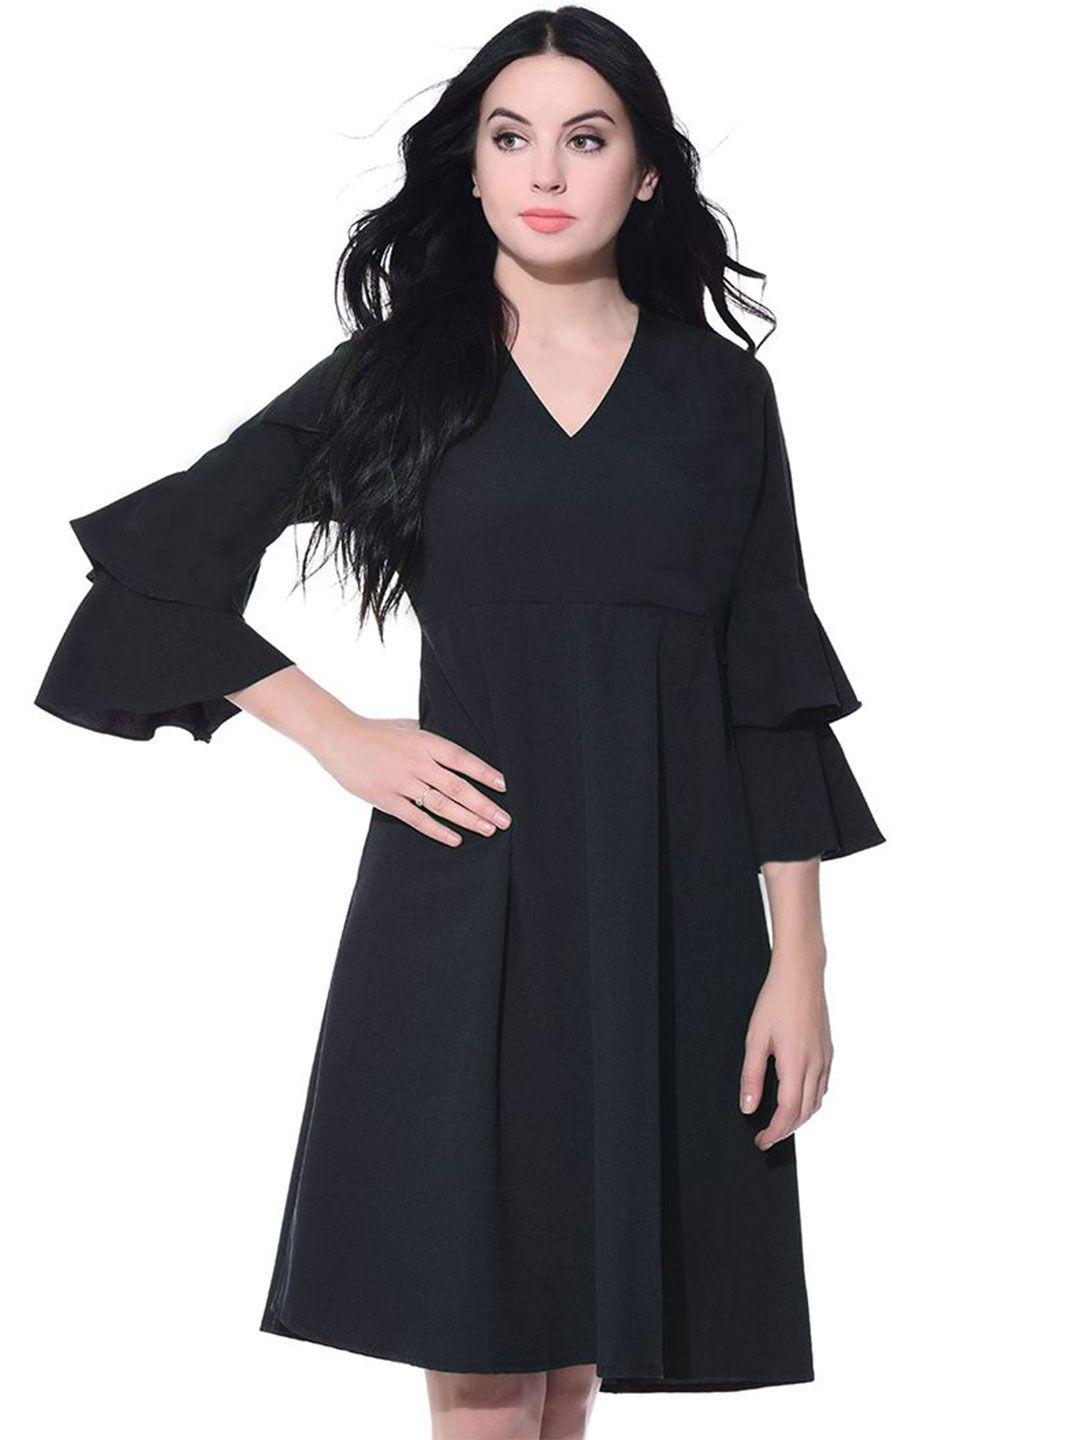 uptownie-lite-bell-sleeves-fit-&-flare-dress-with-belt